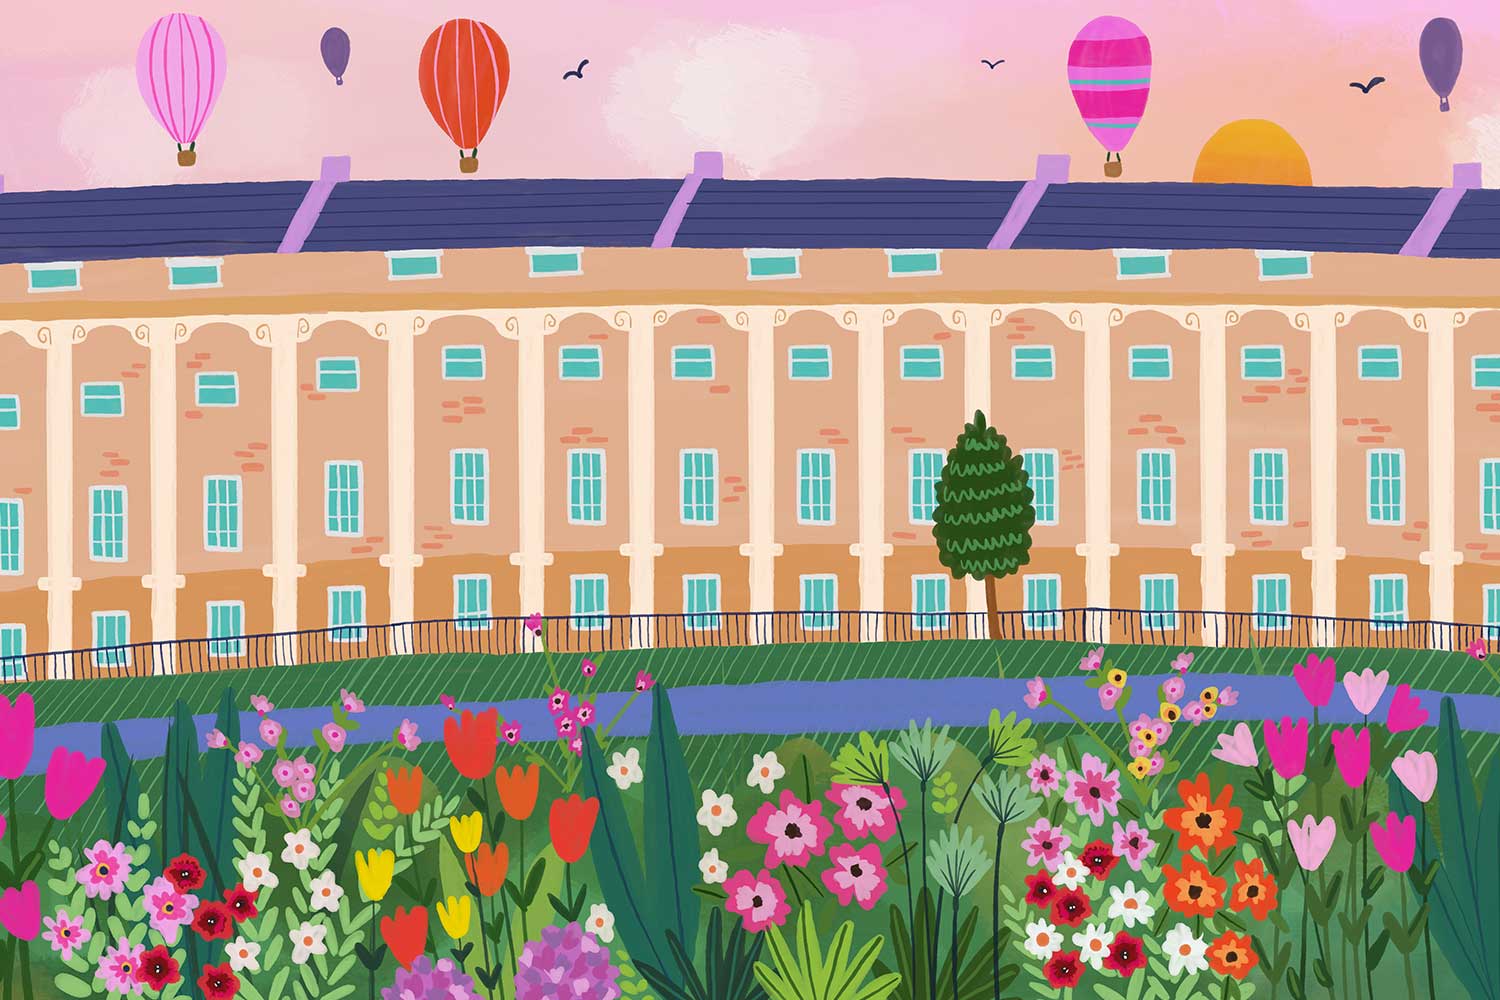 A bright, colourful illustration of the Royal Crescent in Bath